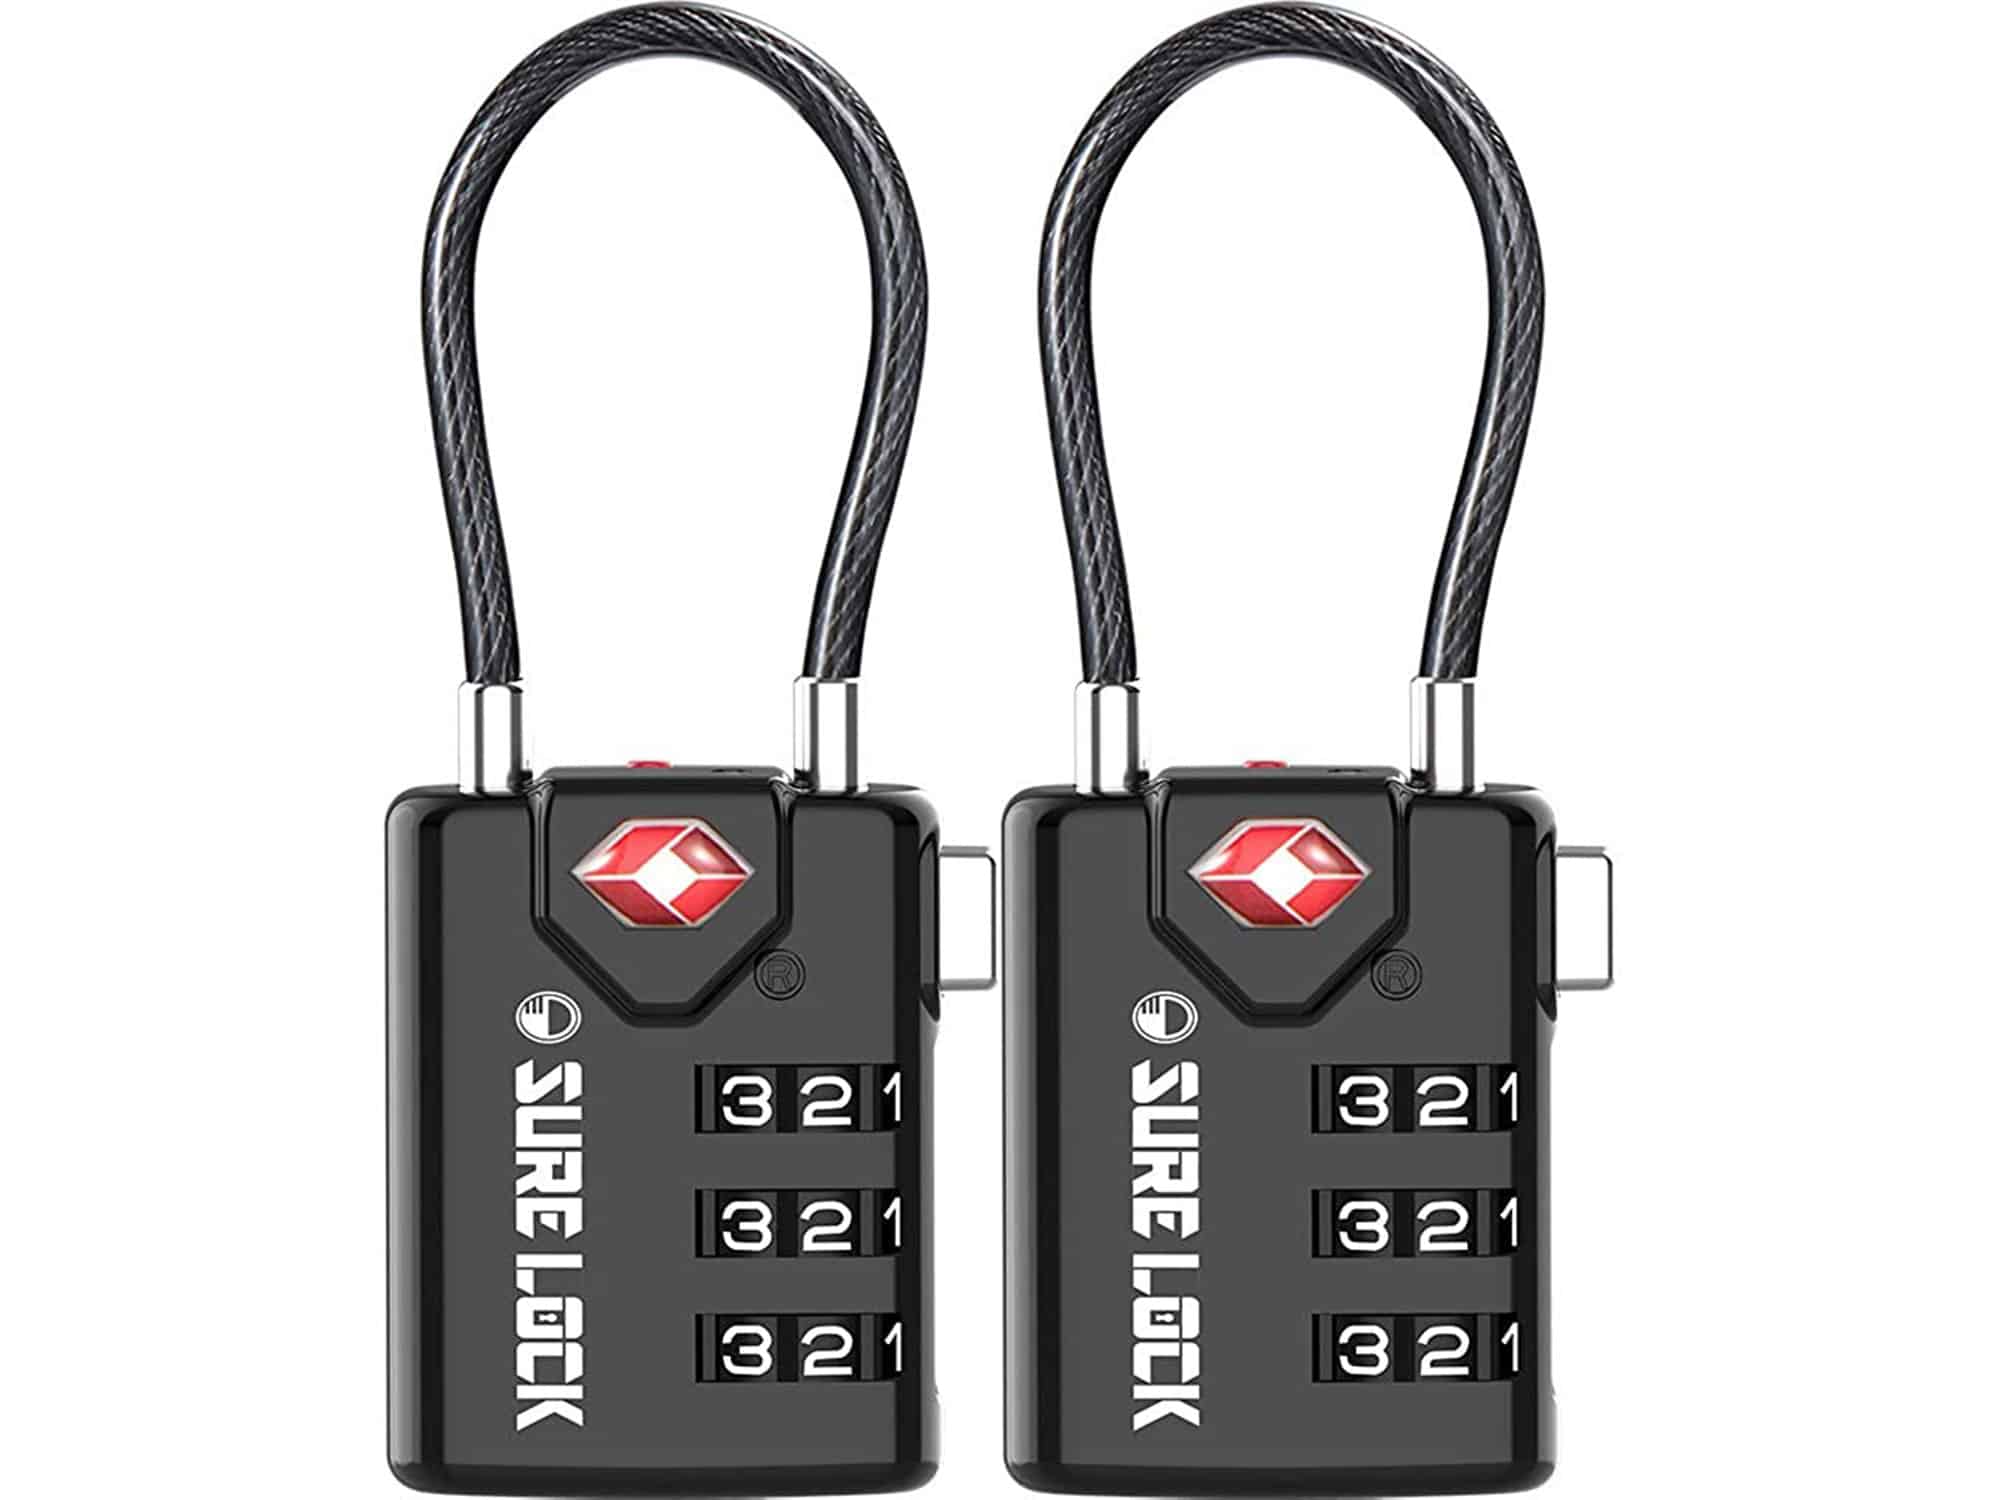 SURE LOCK TSA Compatible Travel Luggage Locks, Inspection Indicator, Easy Read Dials - 2 pack